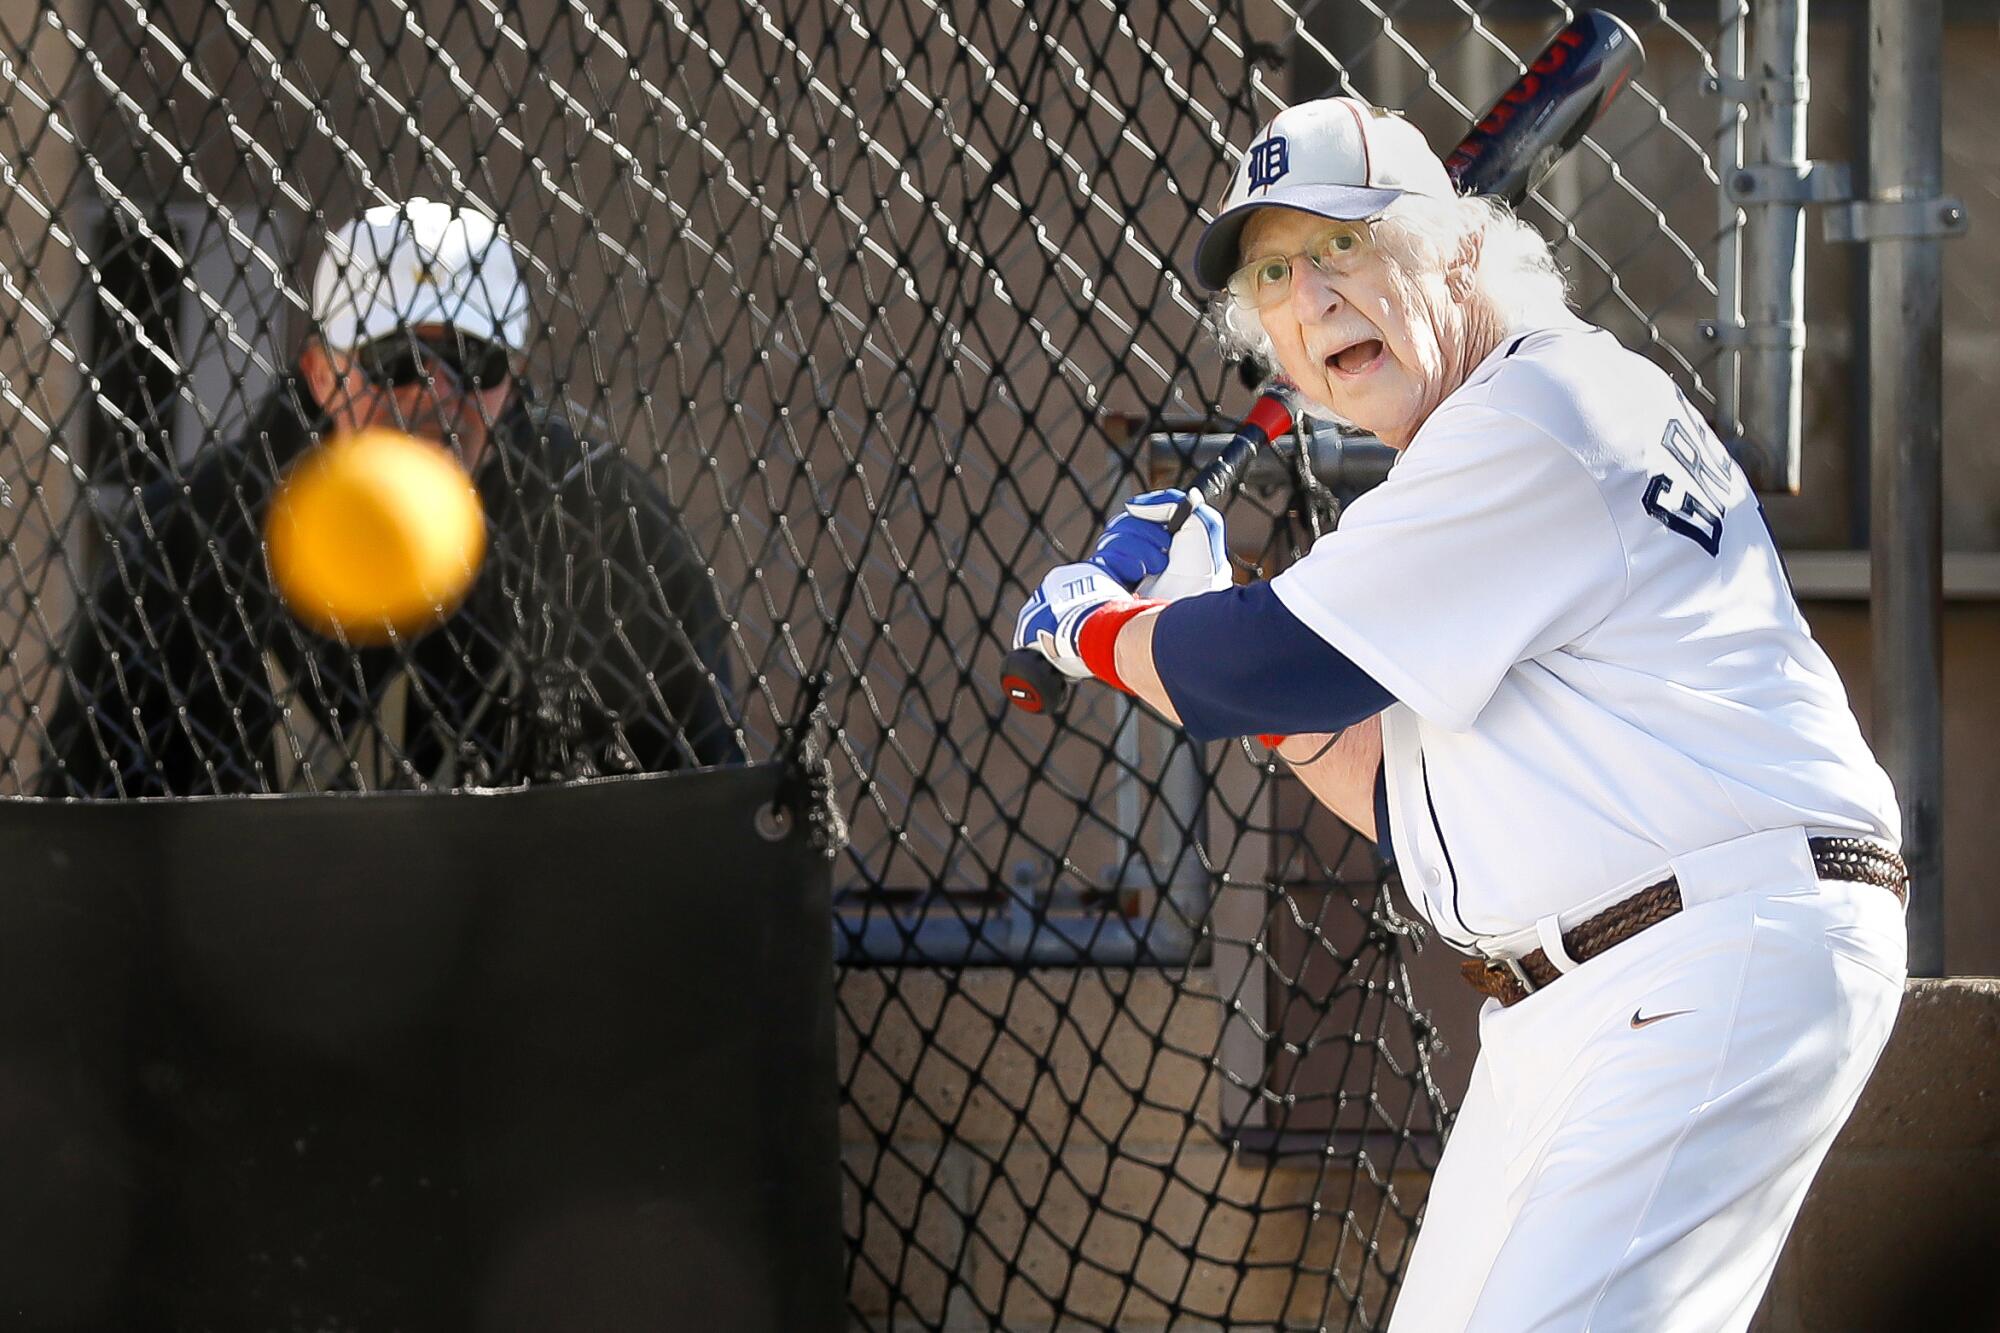 Benny Wasserman, 88, eyes a pitch in the batting cages at Home Run Park in Anaheim.